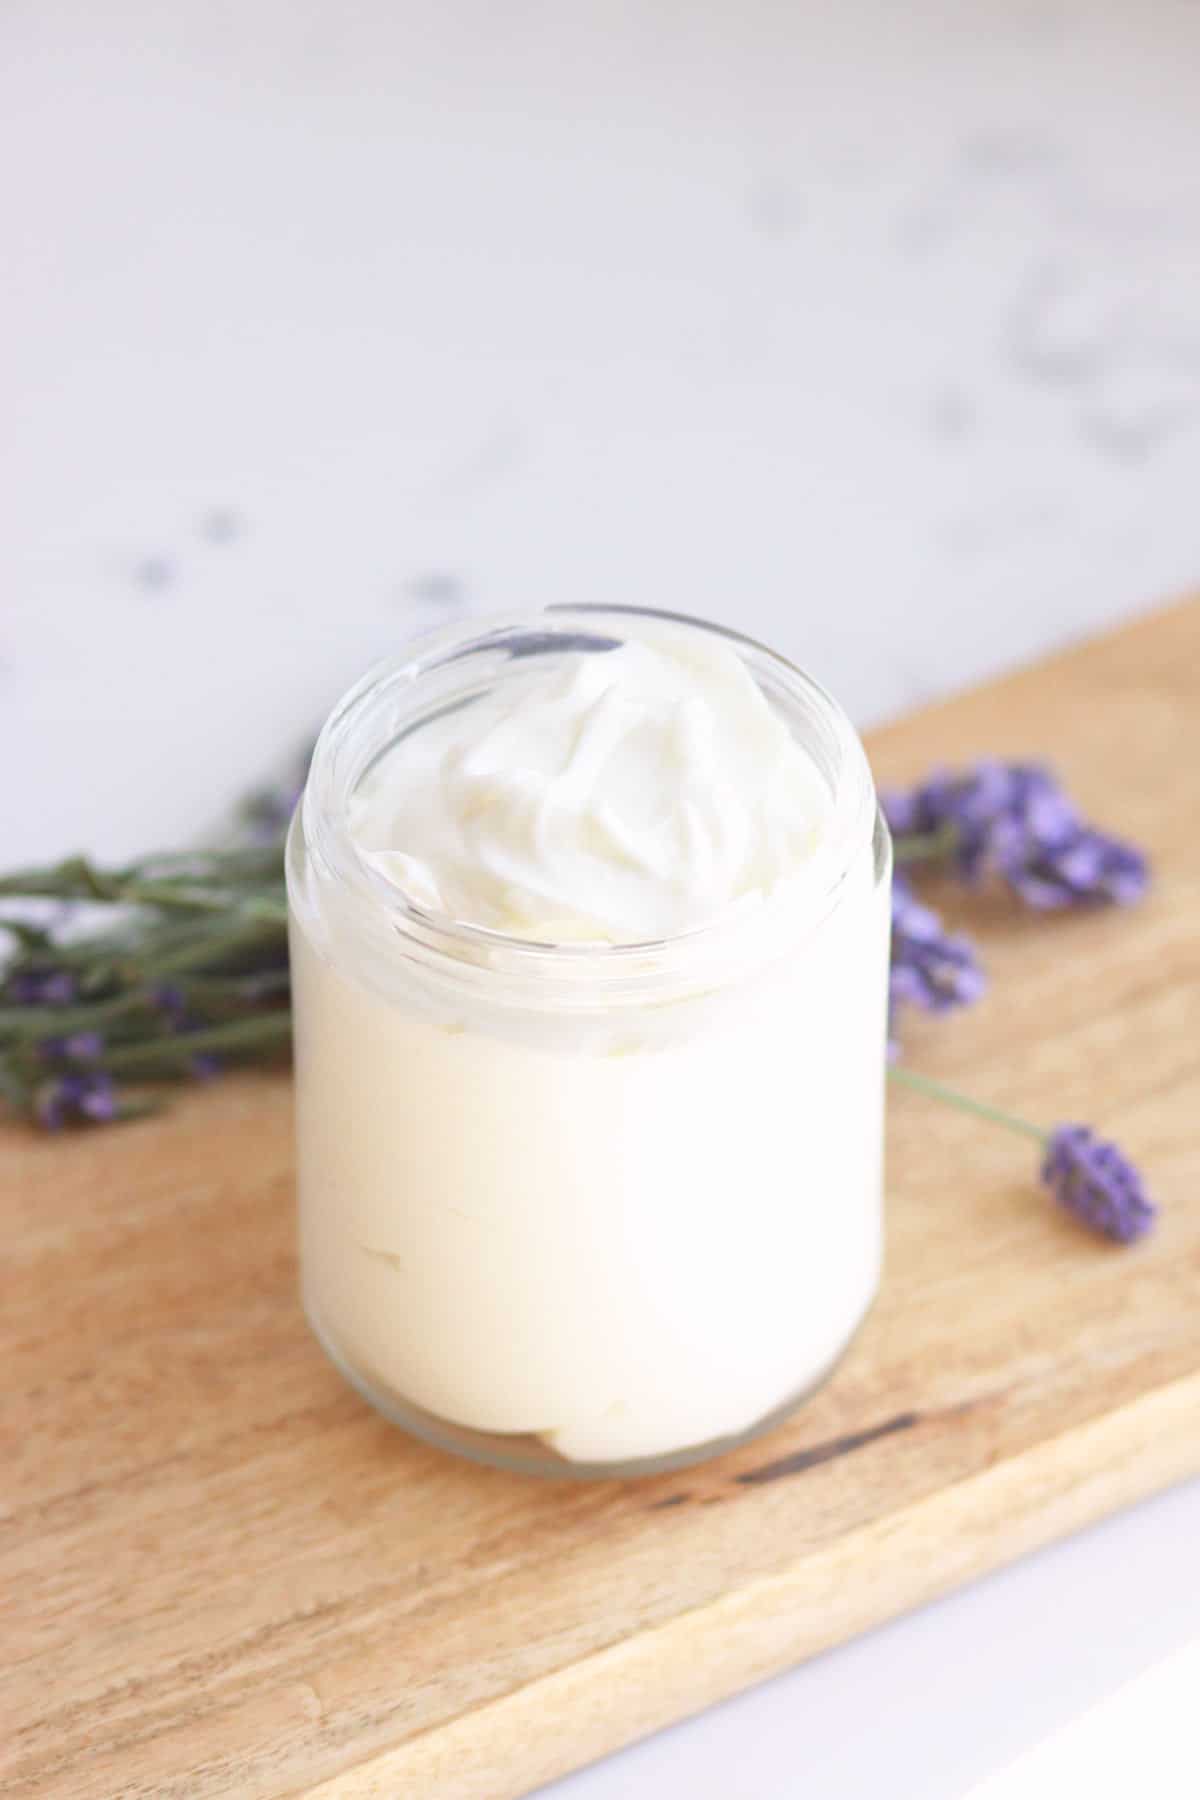 A glass jar of homemade lavender lotion